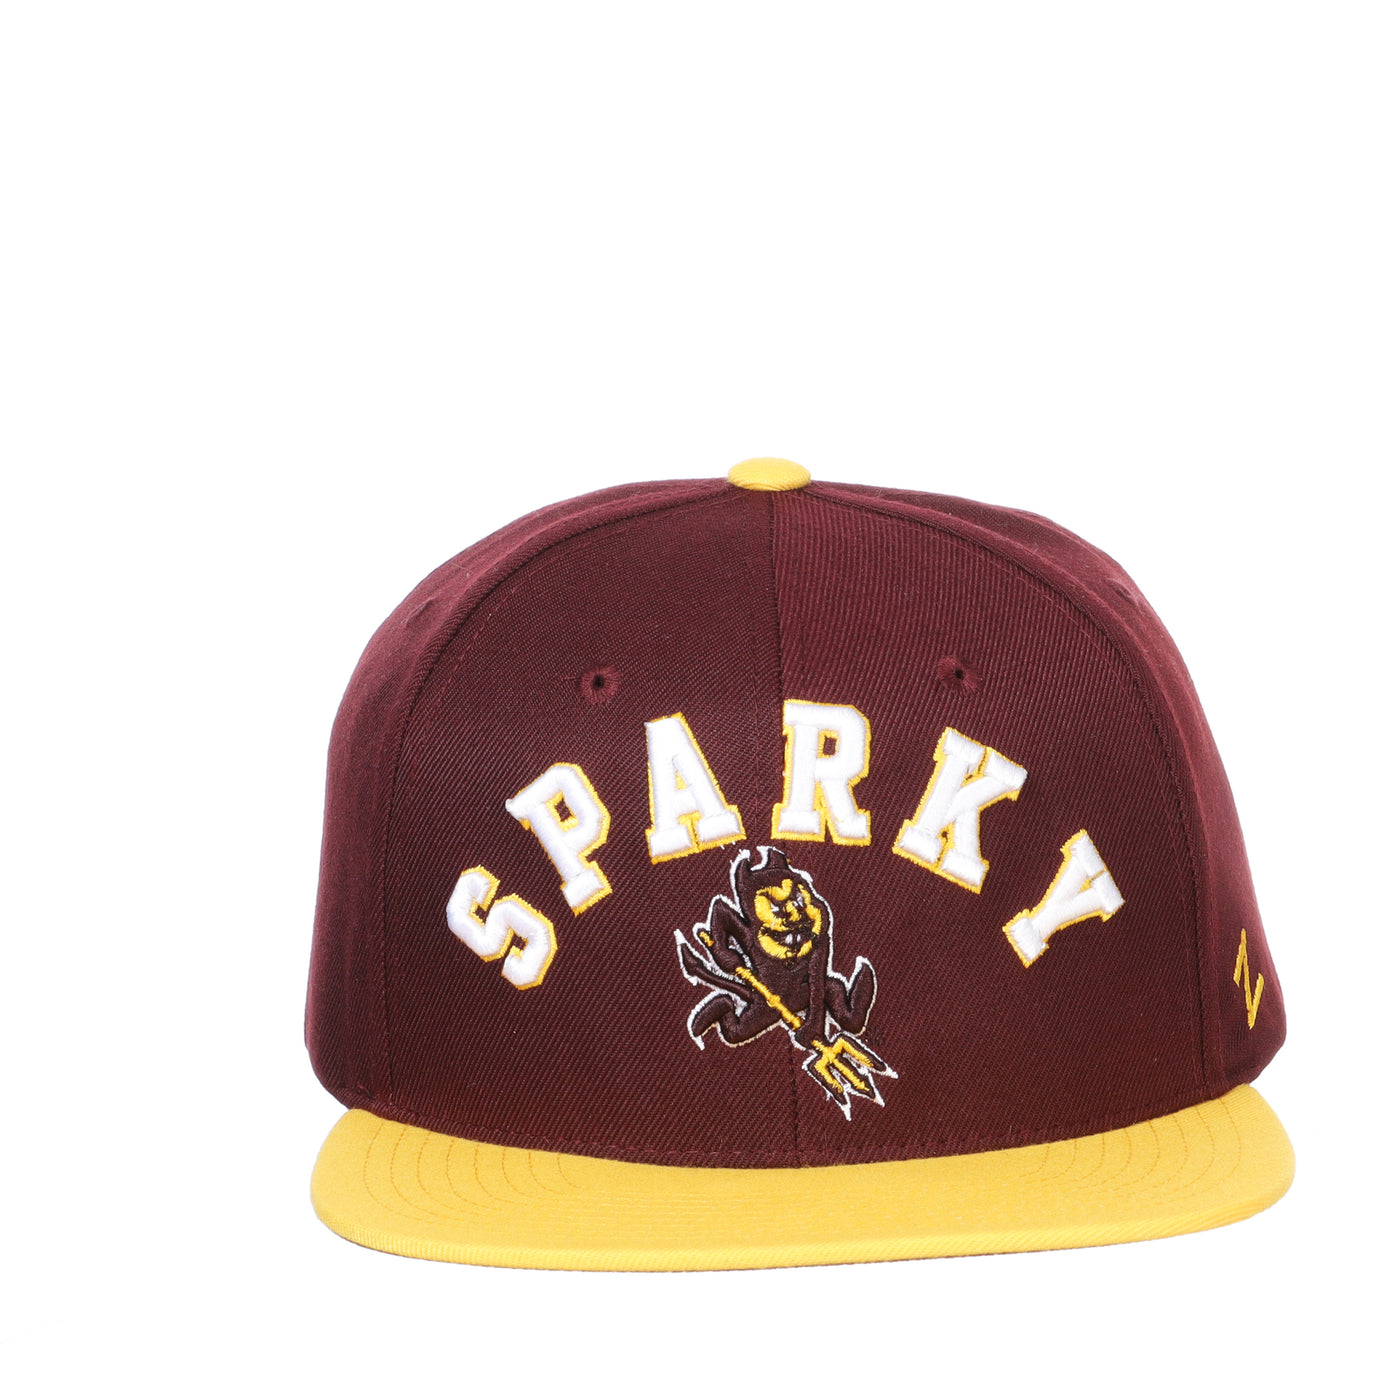 ASU maroon and gold snapback hat with flat bill and 'Sparky' lettering above an embroidered Sparky